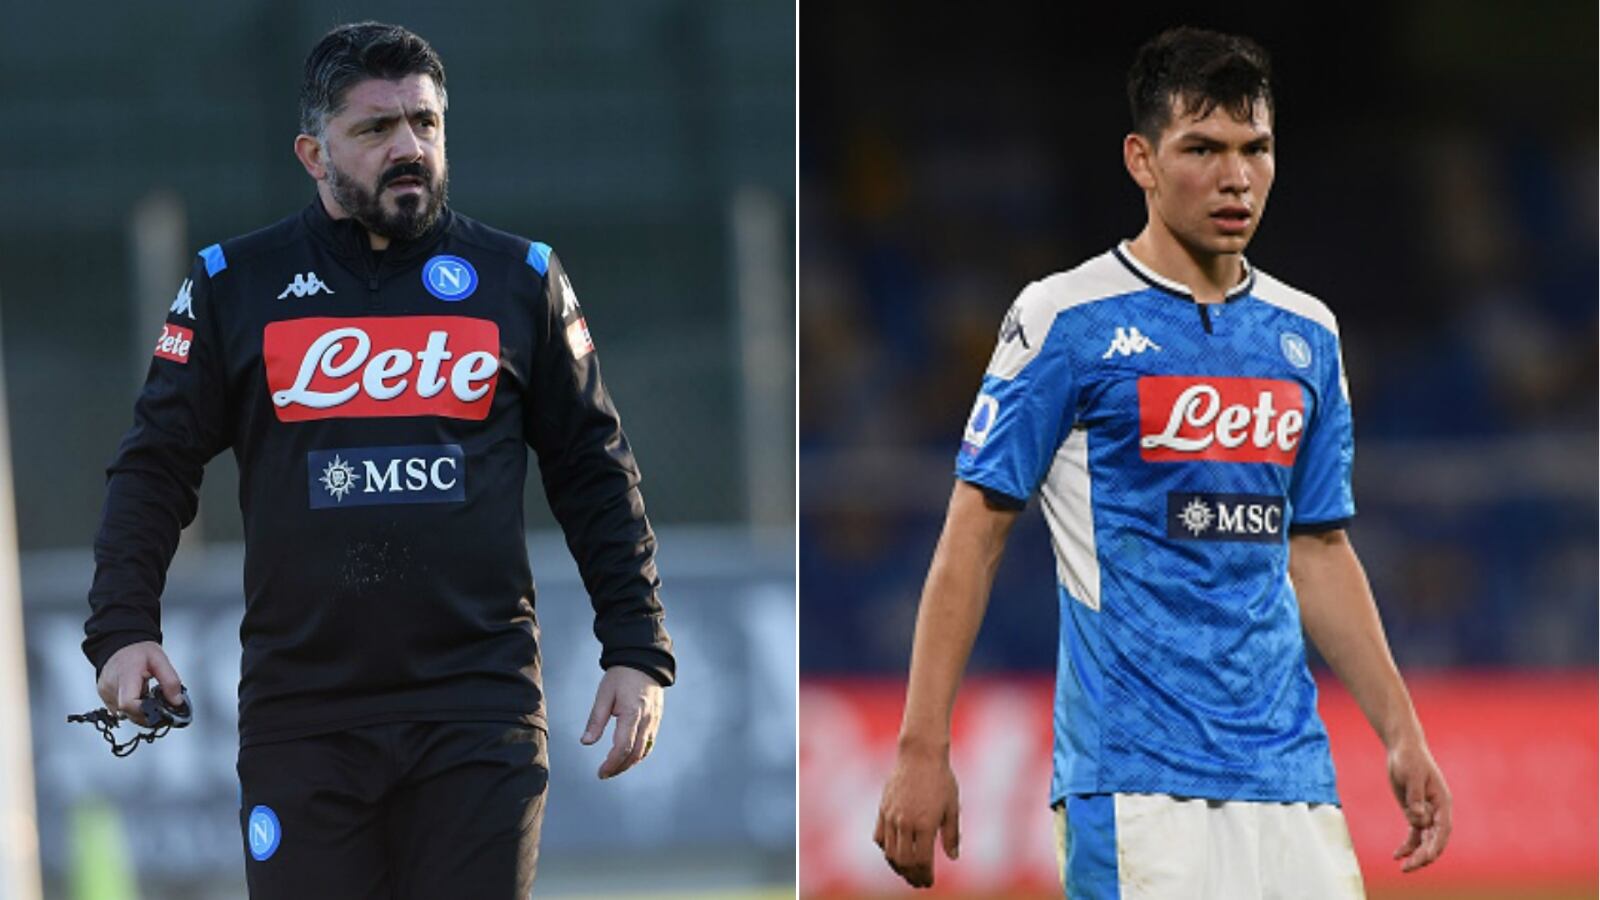 Gennaro Gattuso is set to leave Napoli: the new coach who would manage Hirving Lozano